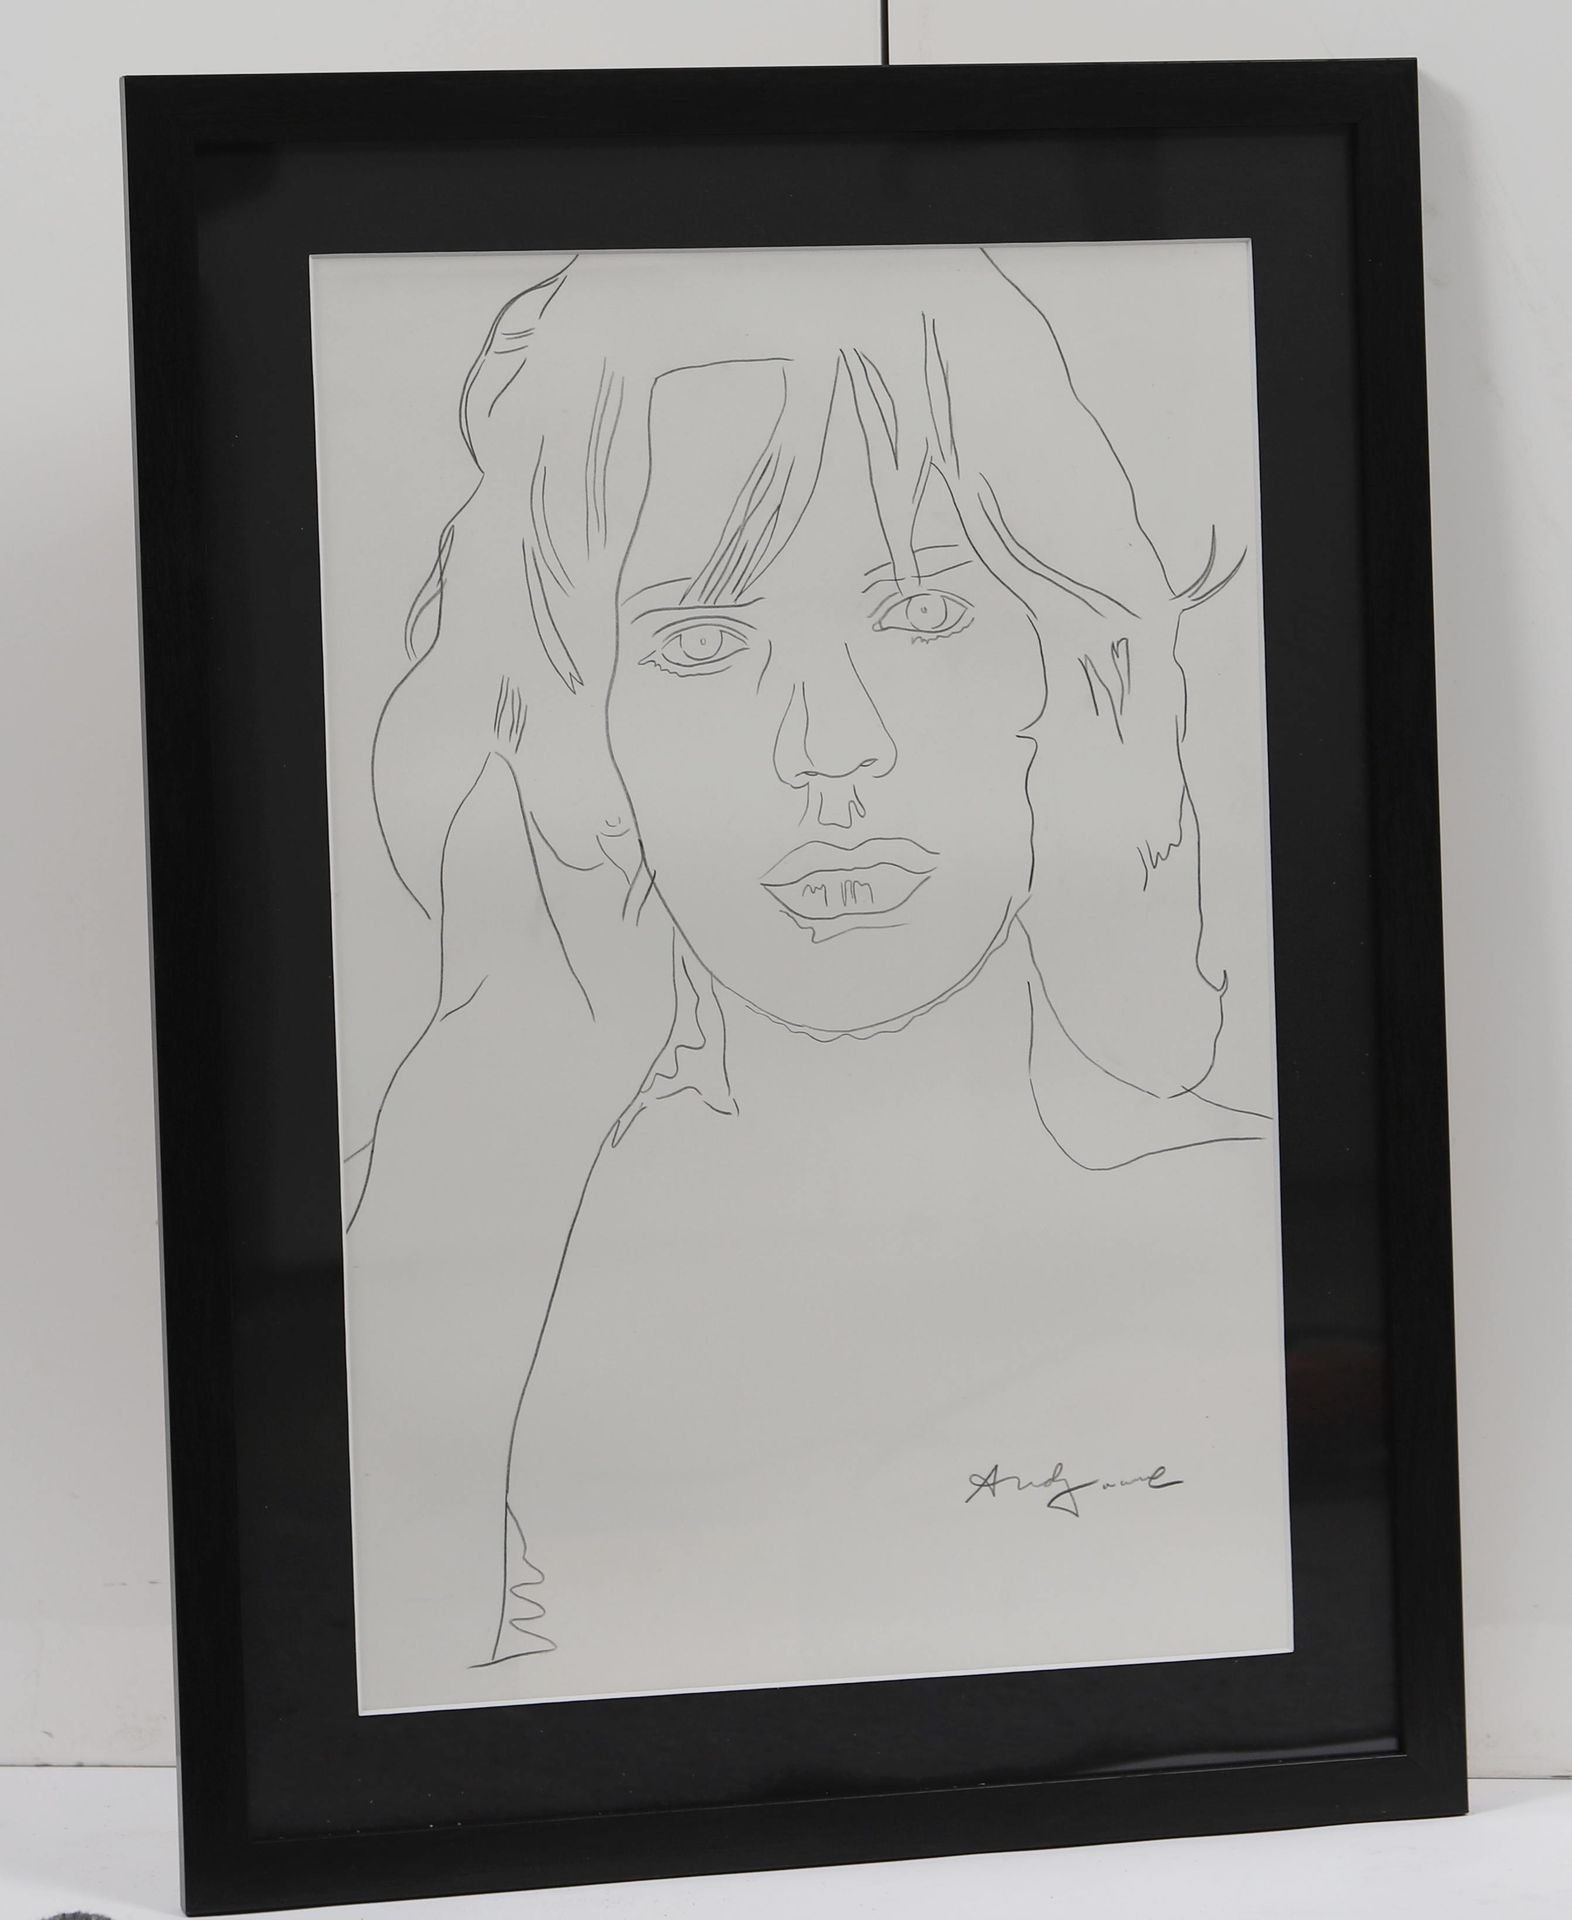 Null Mick jJagger Attr. To Andy WARHOL (1928-1987)

Original pencil drawing on p&hellip;